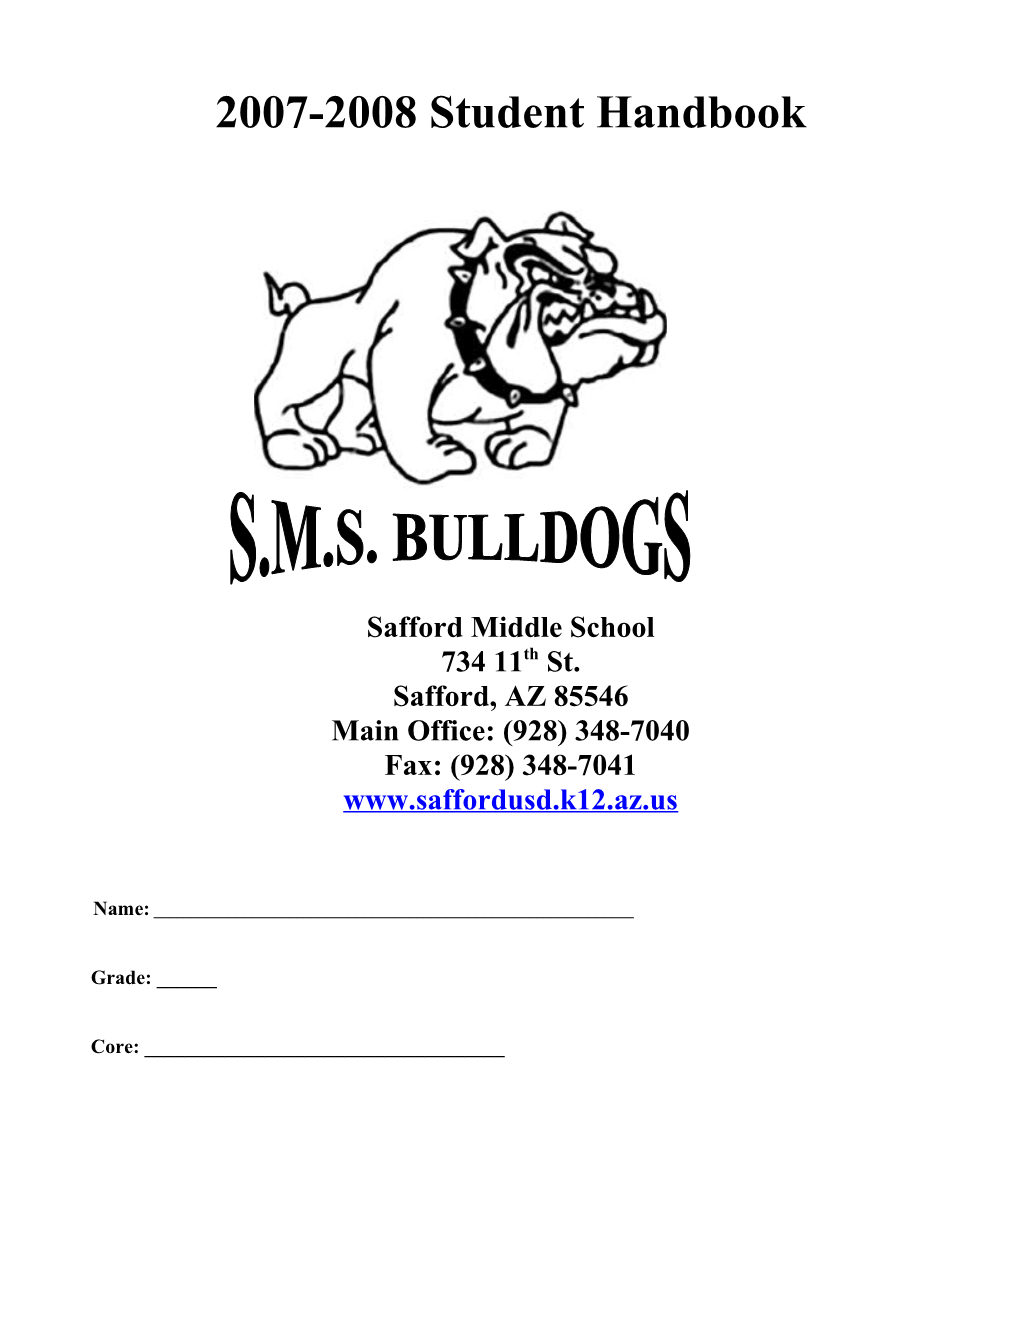 Safford Middle School s1